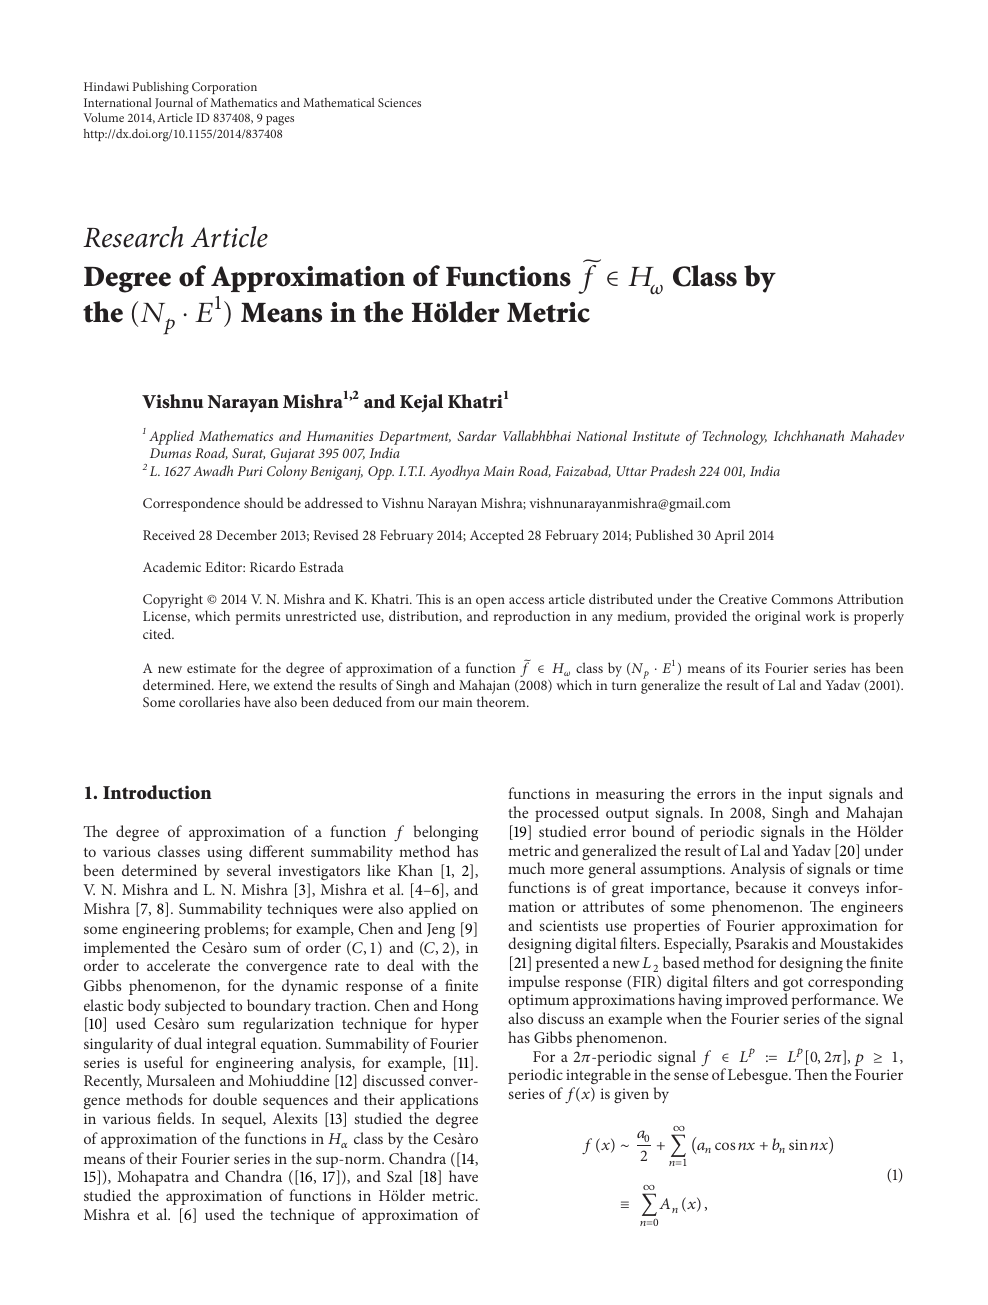 Degree Of Approximation Of Functionsf Hwclass By The Np E1 Means In The Holder Metric Topic Of Research Paper In Mathematics Download Scholarly Article Pdf And Read For Free On Cyberleninka Open Science Hub